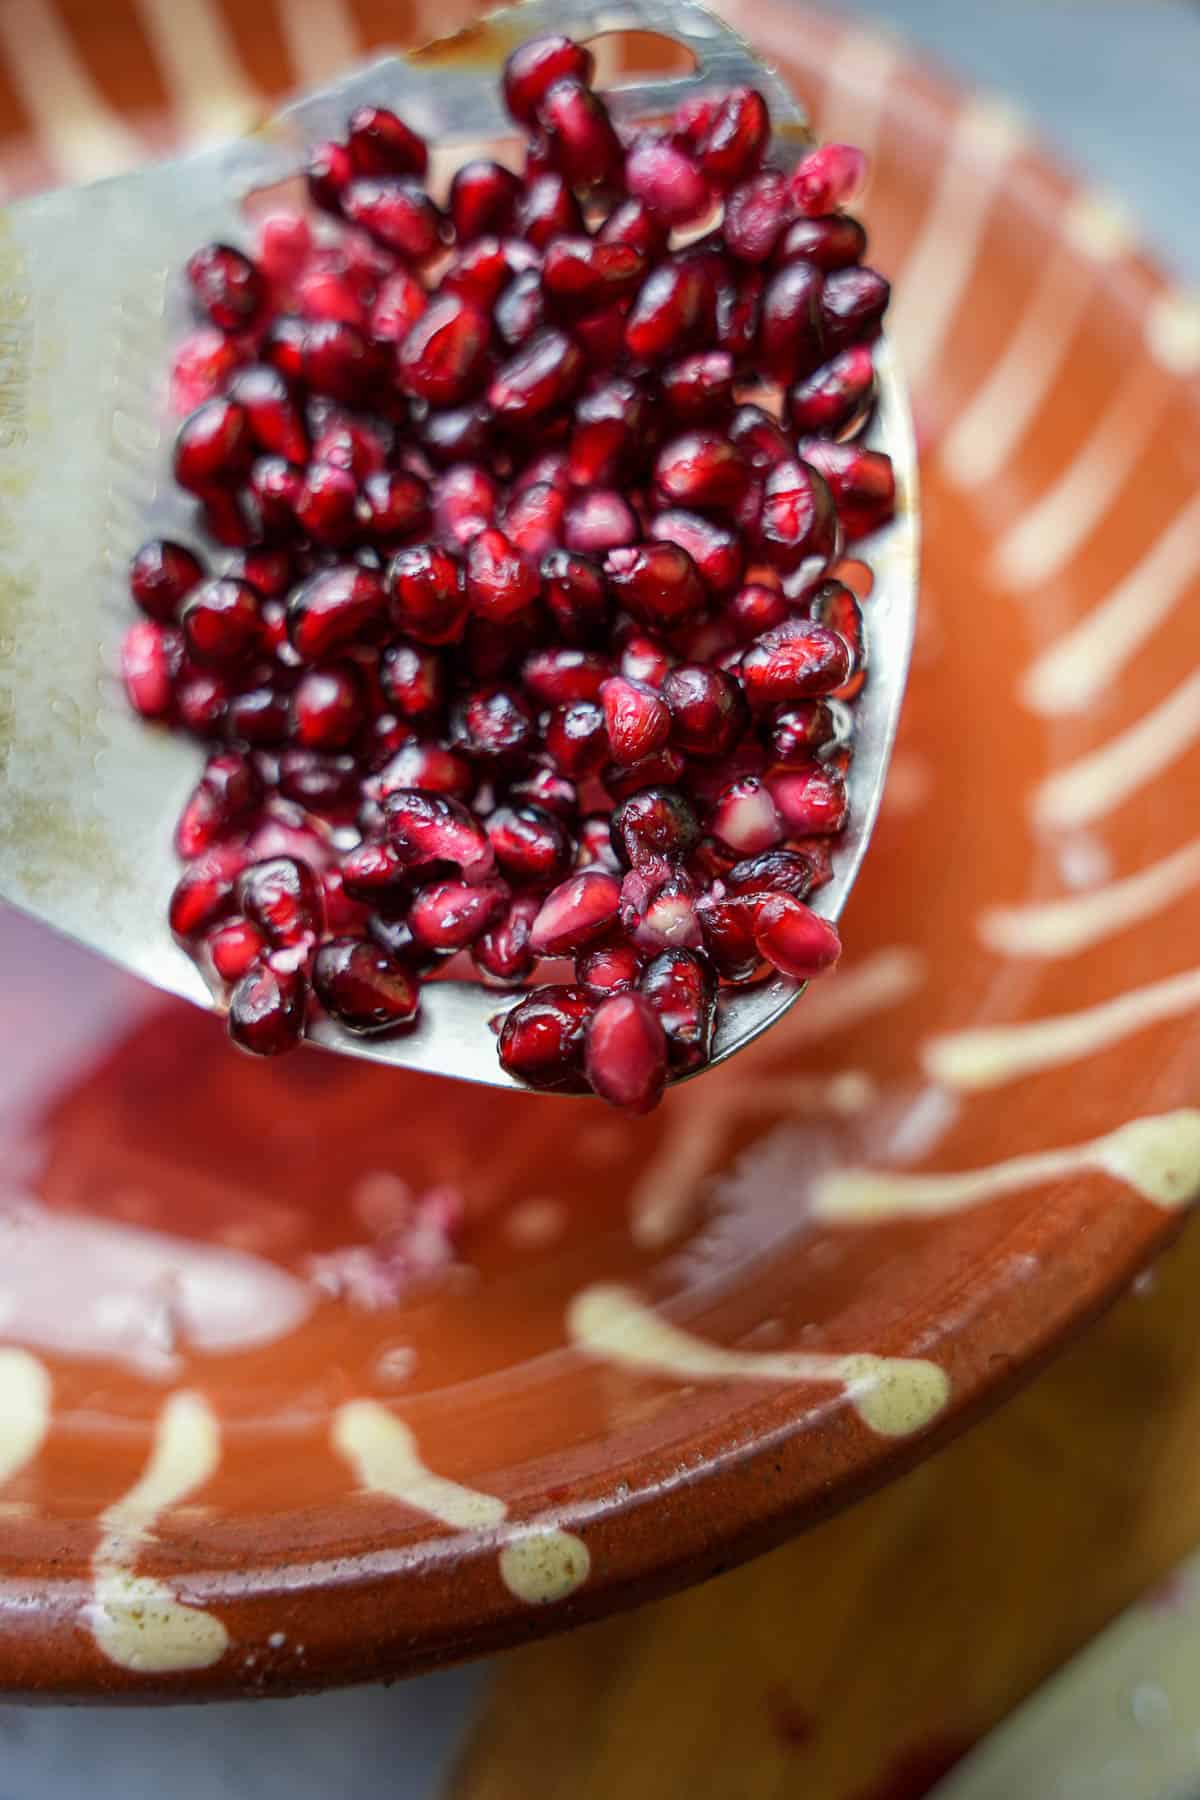 pomegranate seeds, completely free of pith and other matter are removed from the bowl of water with a slotted spoon.